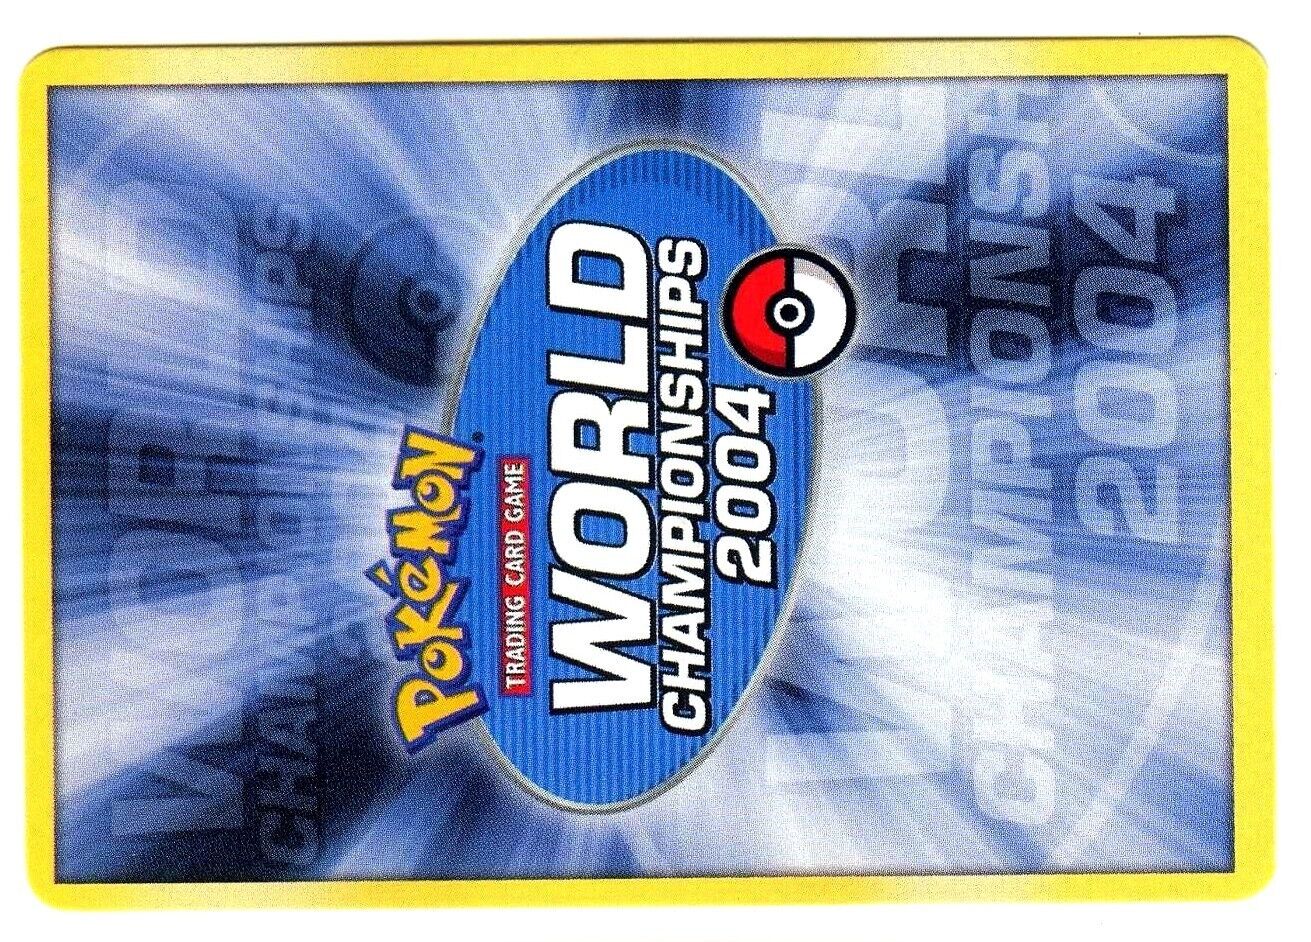 ♥ POKEMON WORLD CHAMPIONSHIPS CARD From 2004 to 2019 YOUR CHOICE ♥